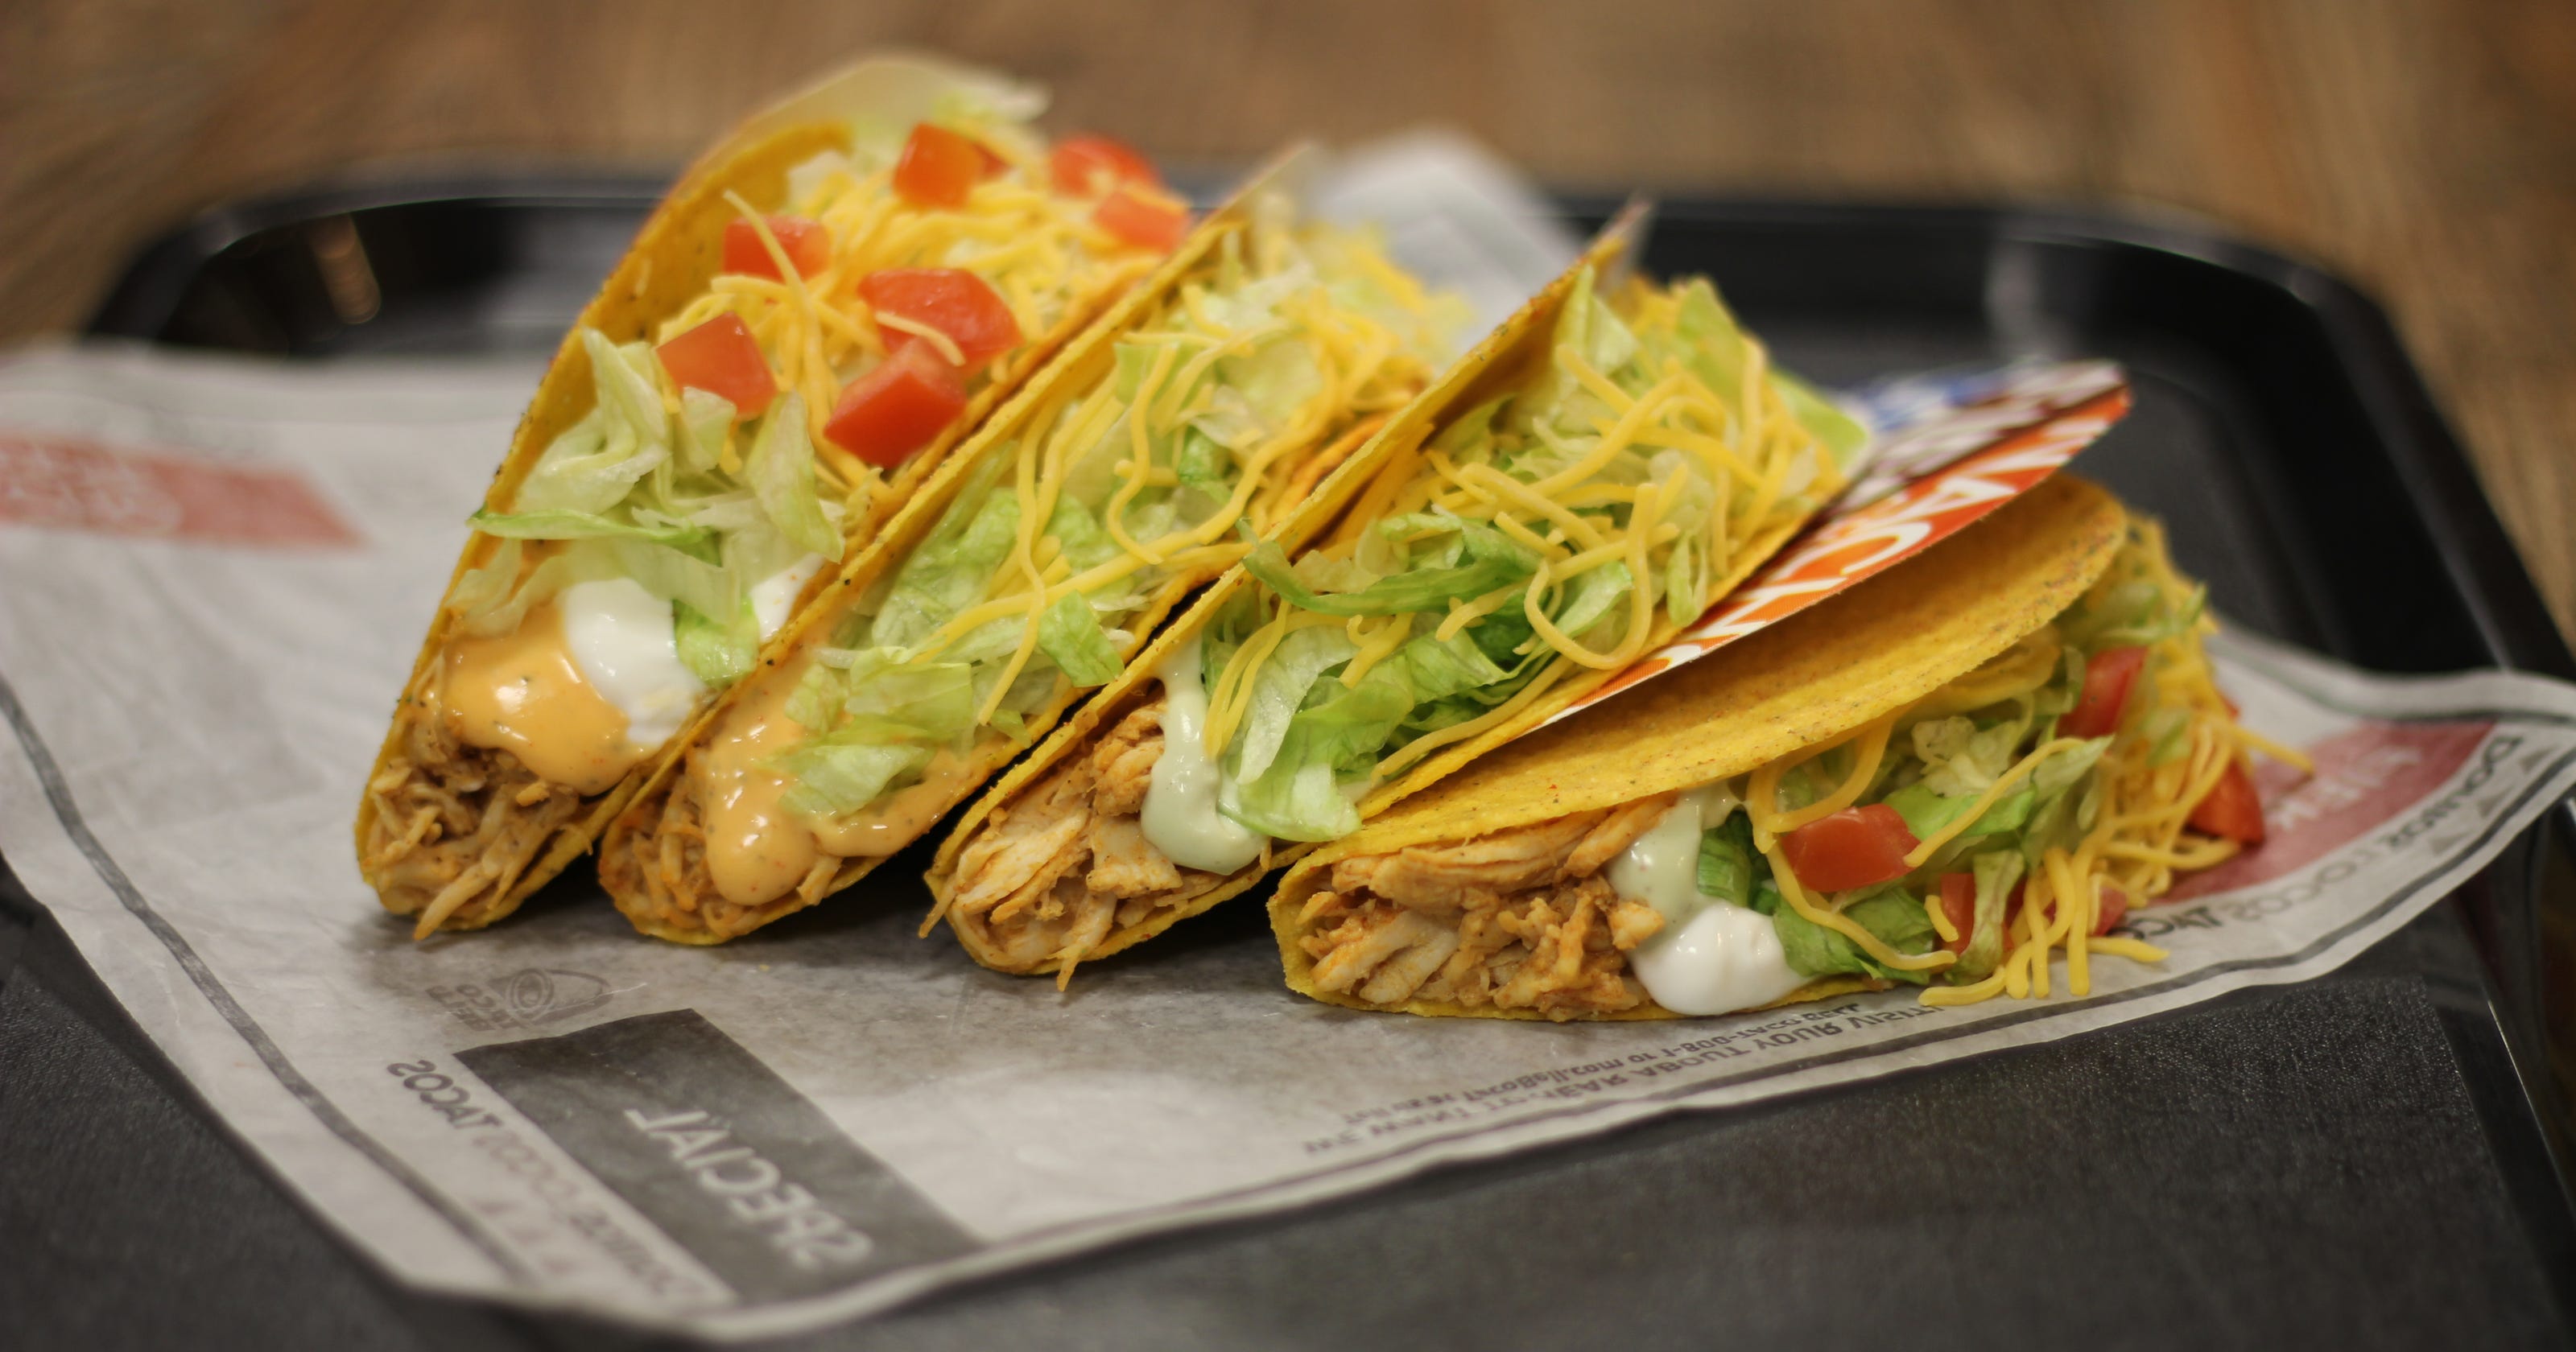 Free tacos at Taco Bell today, thanks to Golden State Warriors